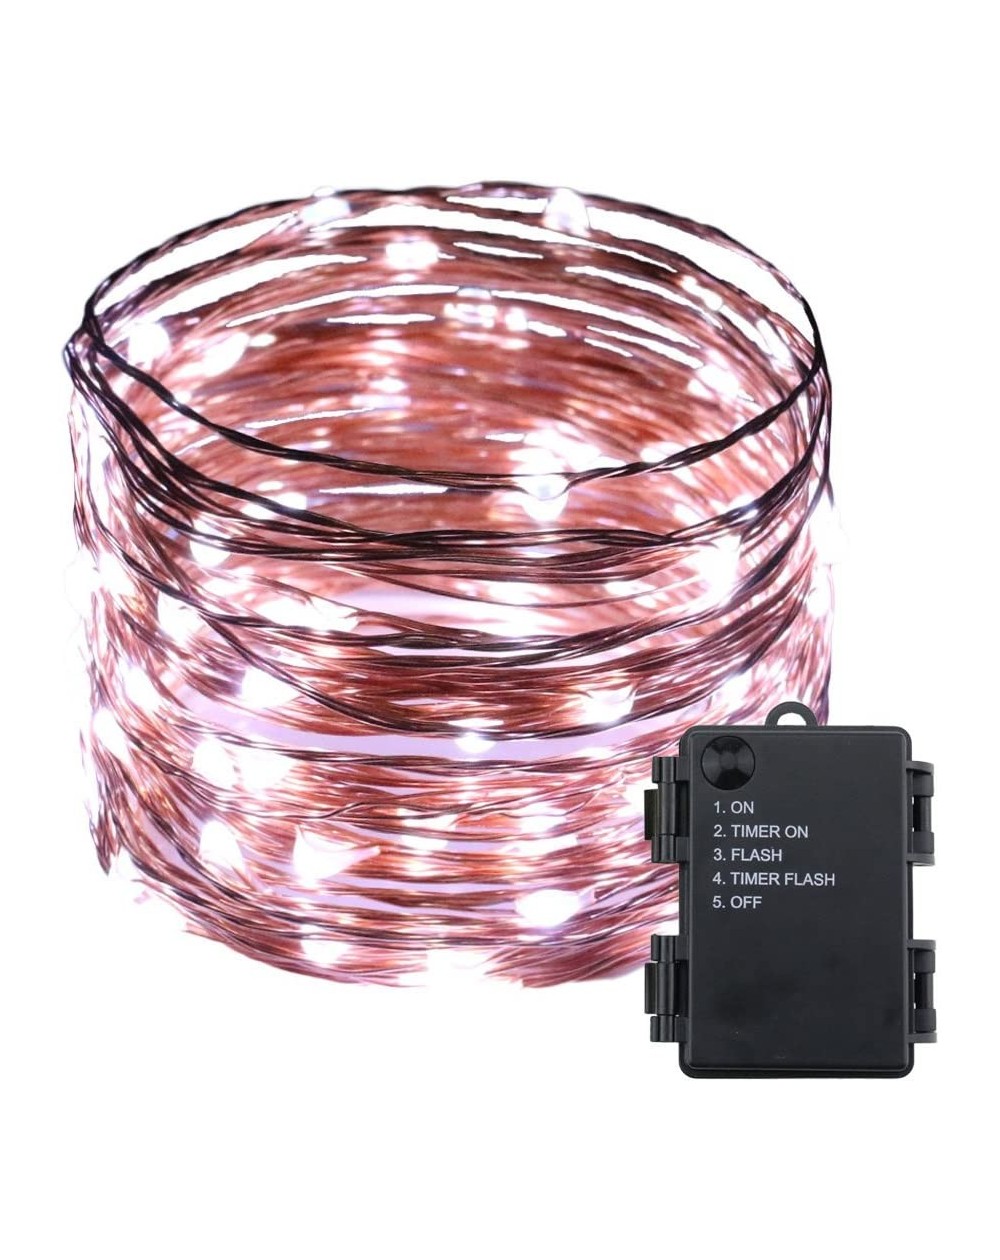 Outdoor String Lights Battery Powered LED String Lights- 33FT 100 LED Waterproof Copper Wire Decorative Starry Fairy Lights w...